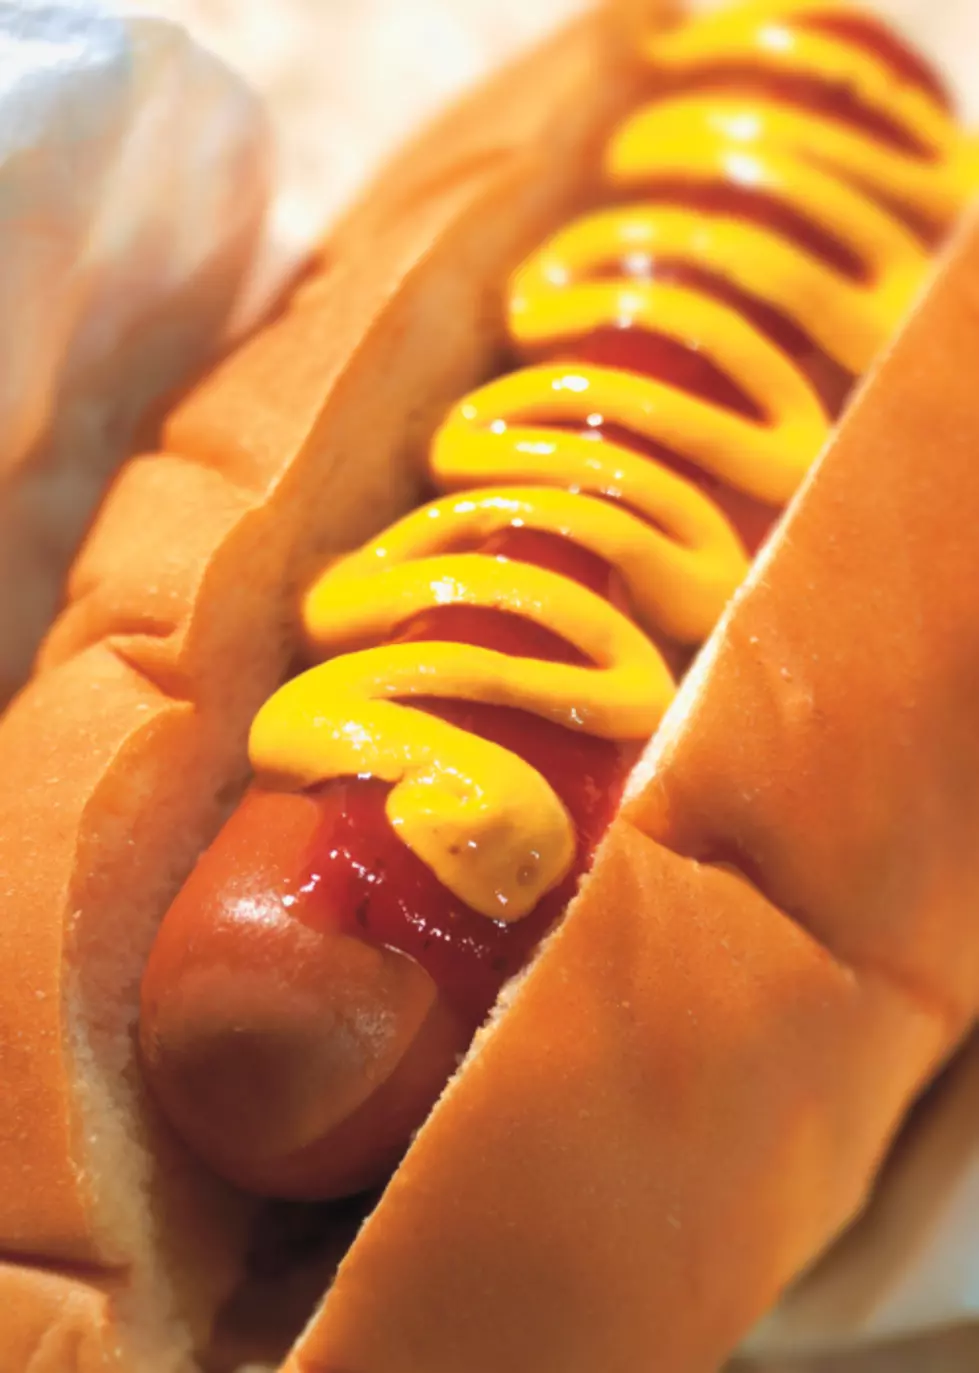 This Might Be The Weirdest Hot Dog Topping EVER